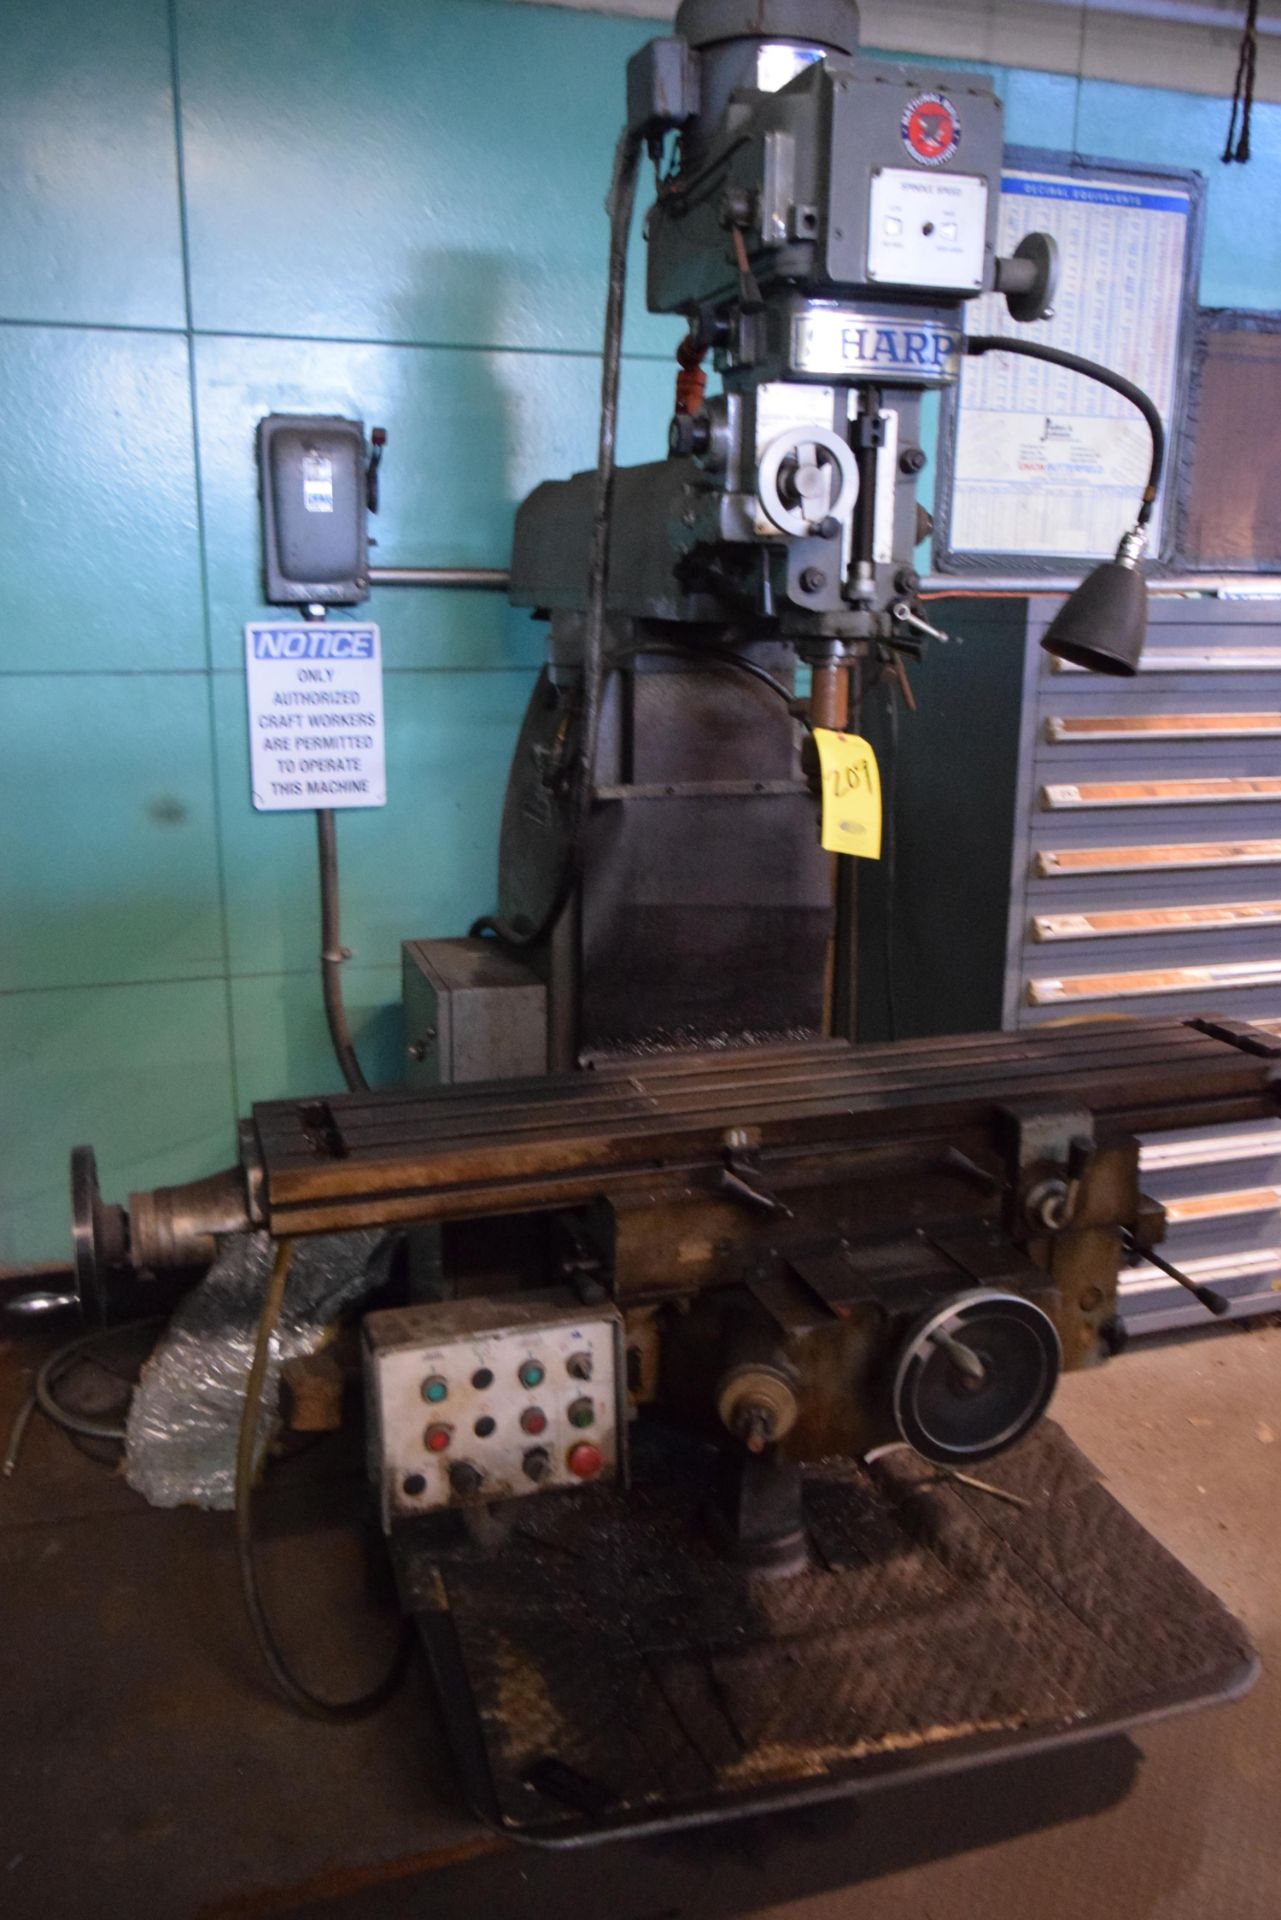 SHARP MODEL TMV 3 HP VARIABLE SPEED, VERTICAL MILLING MACHINE S/N 78070217, 9" X 54" T SLOTTED TABLE - Image 2 of 2